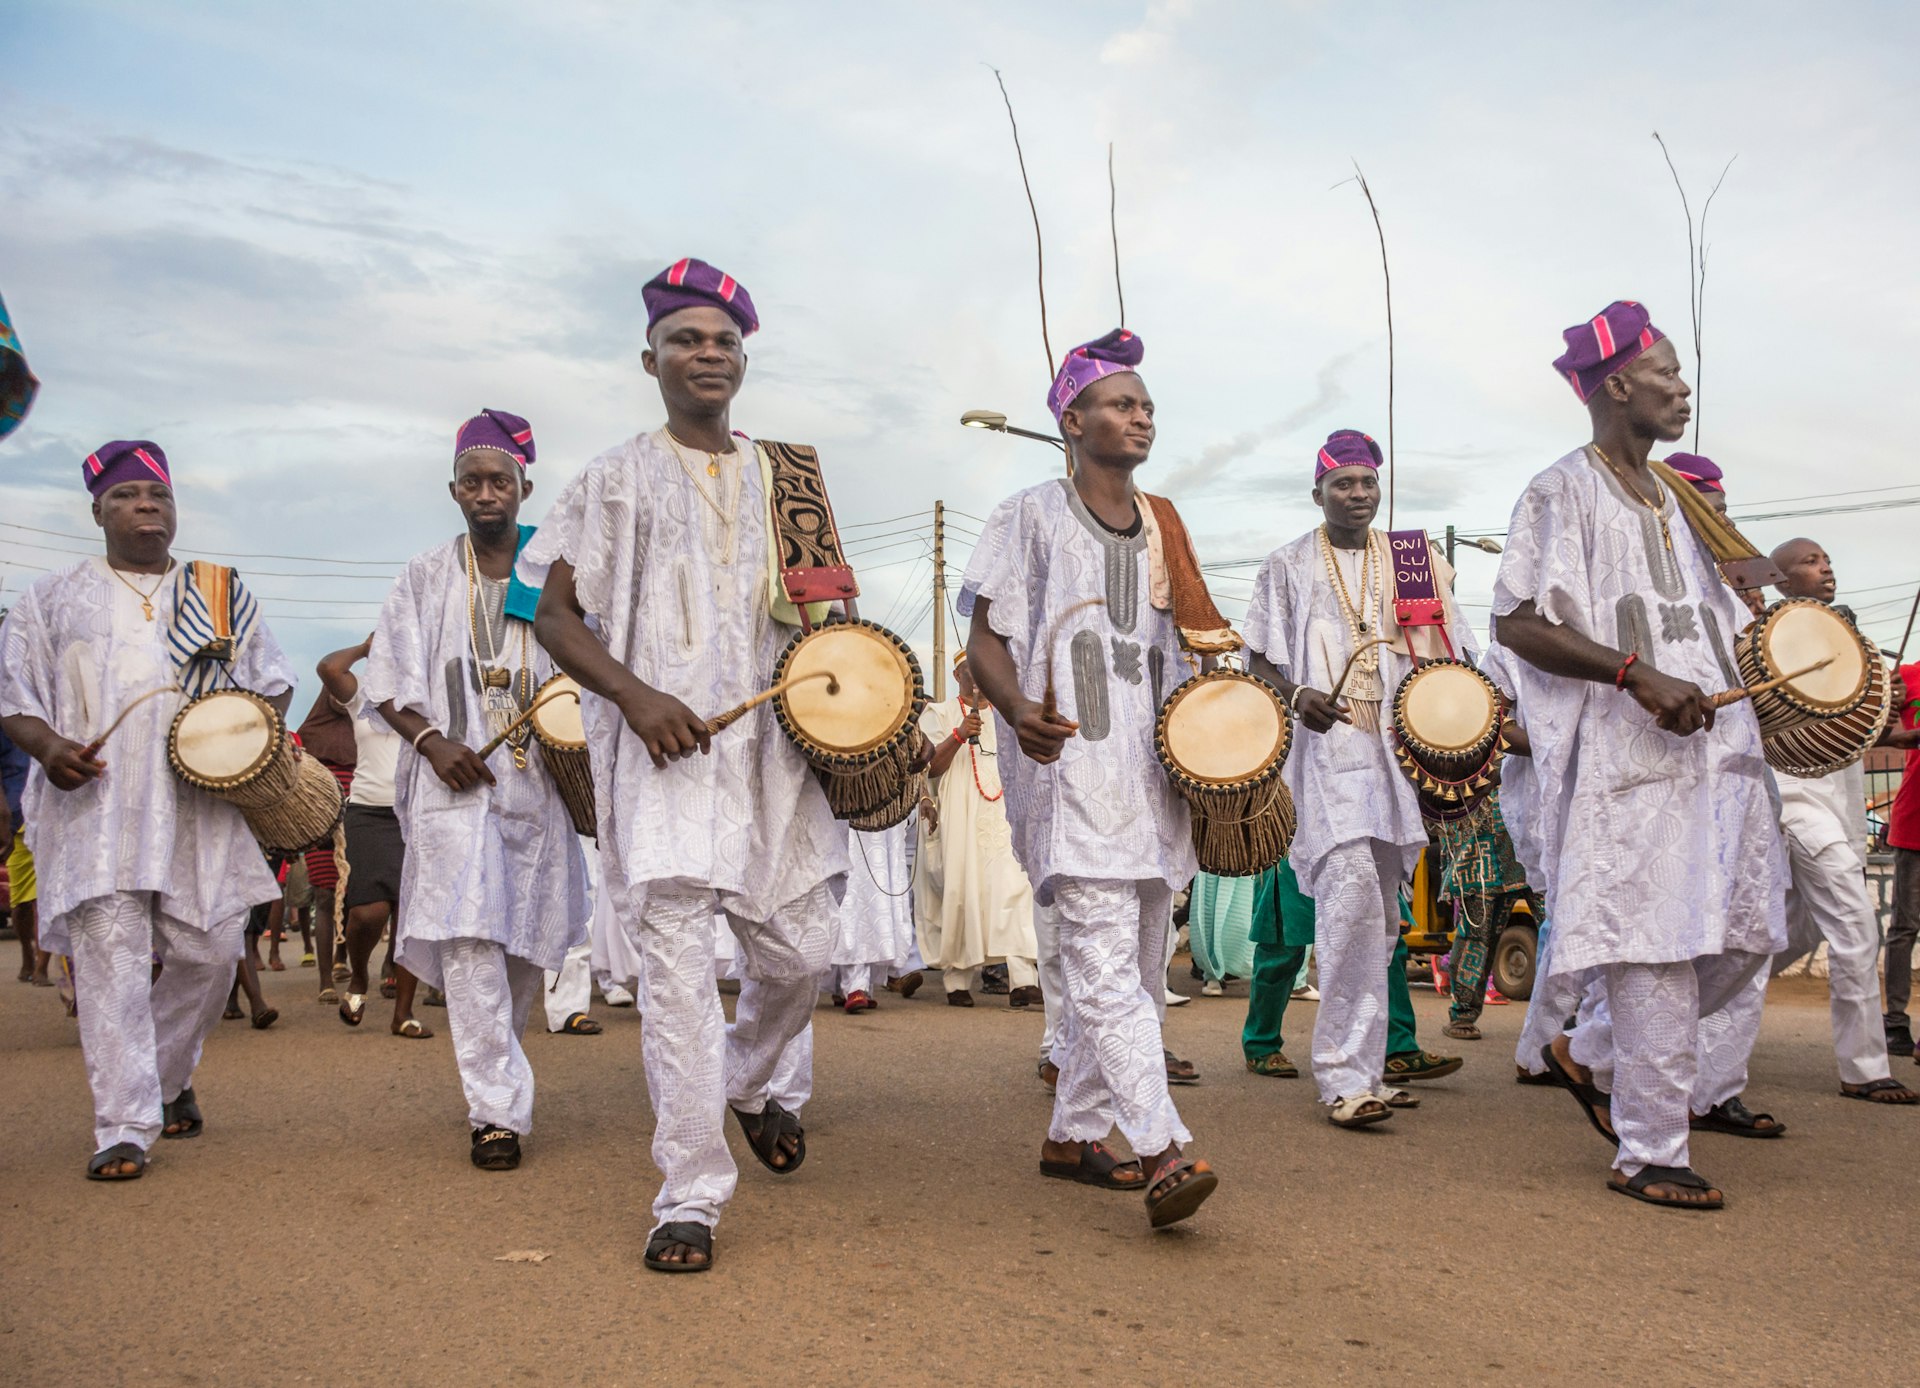 Drummers wearing white perform in the street